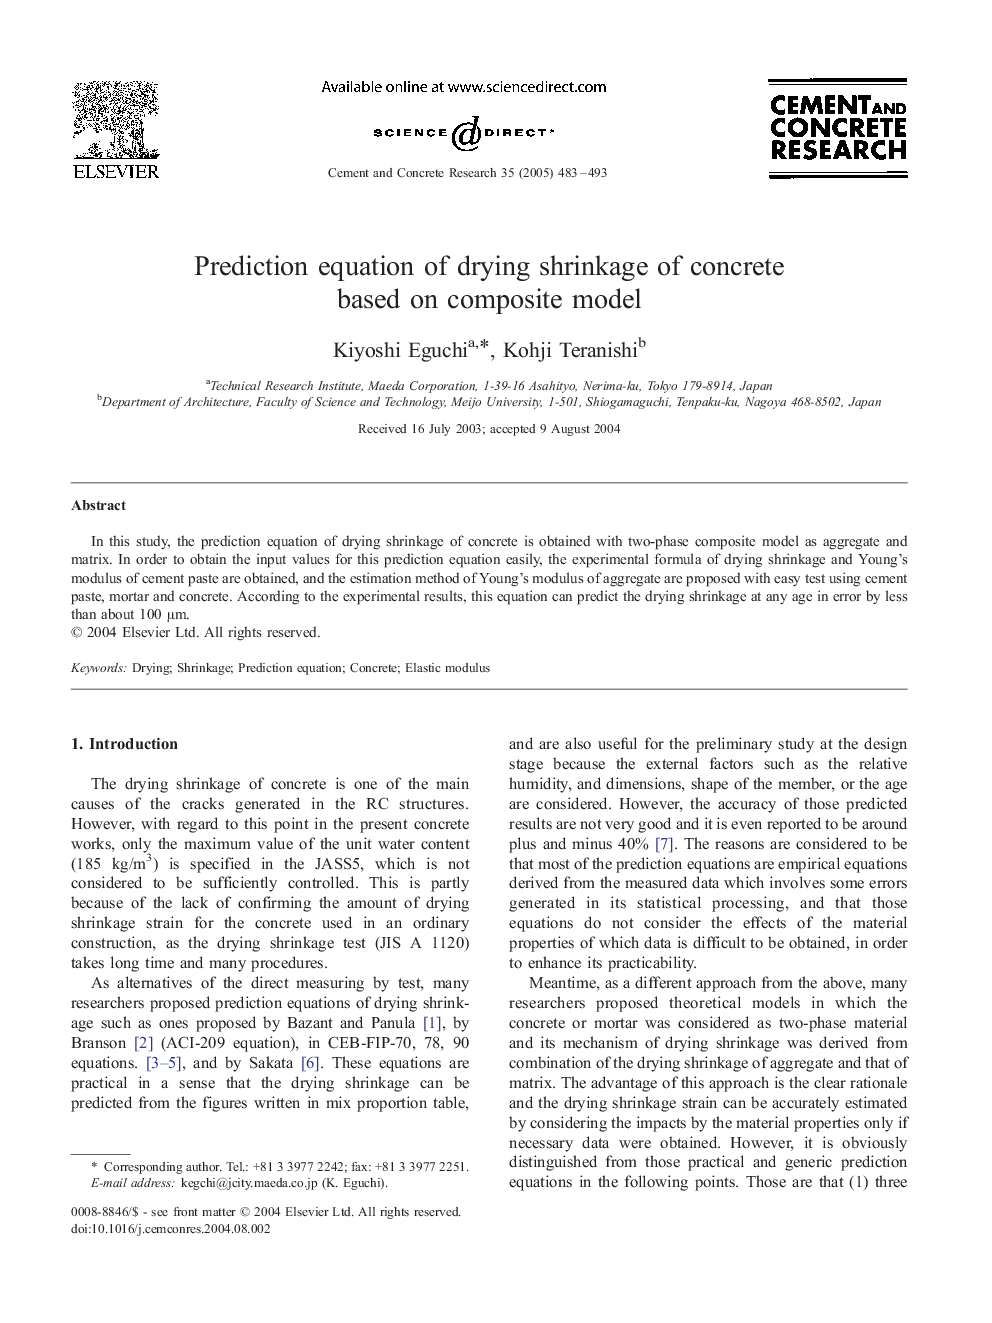 Prediction equation of drying shrinkage of concrete based on composite model